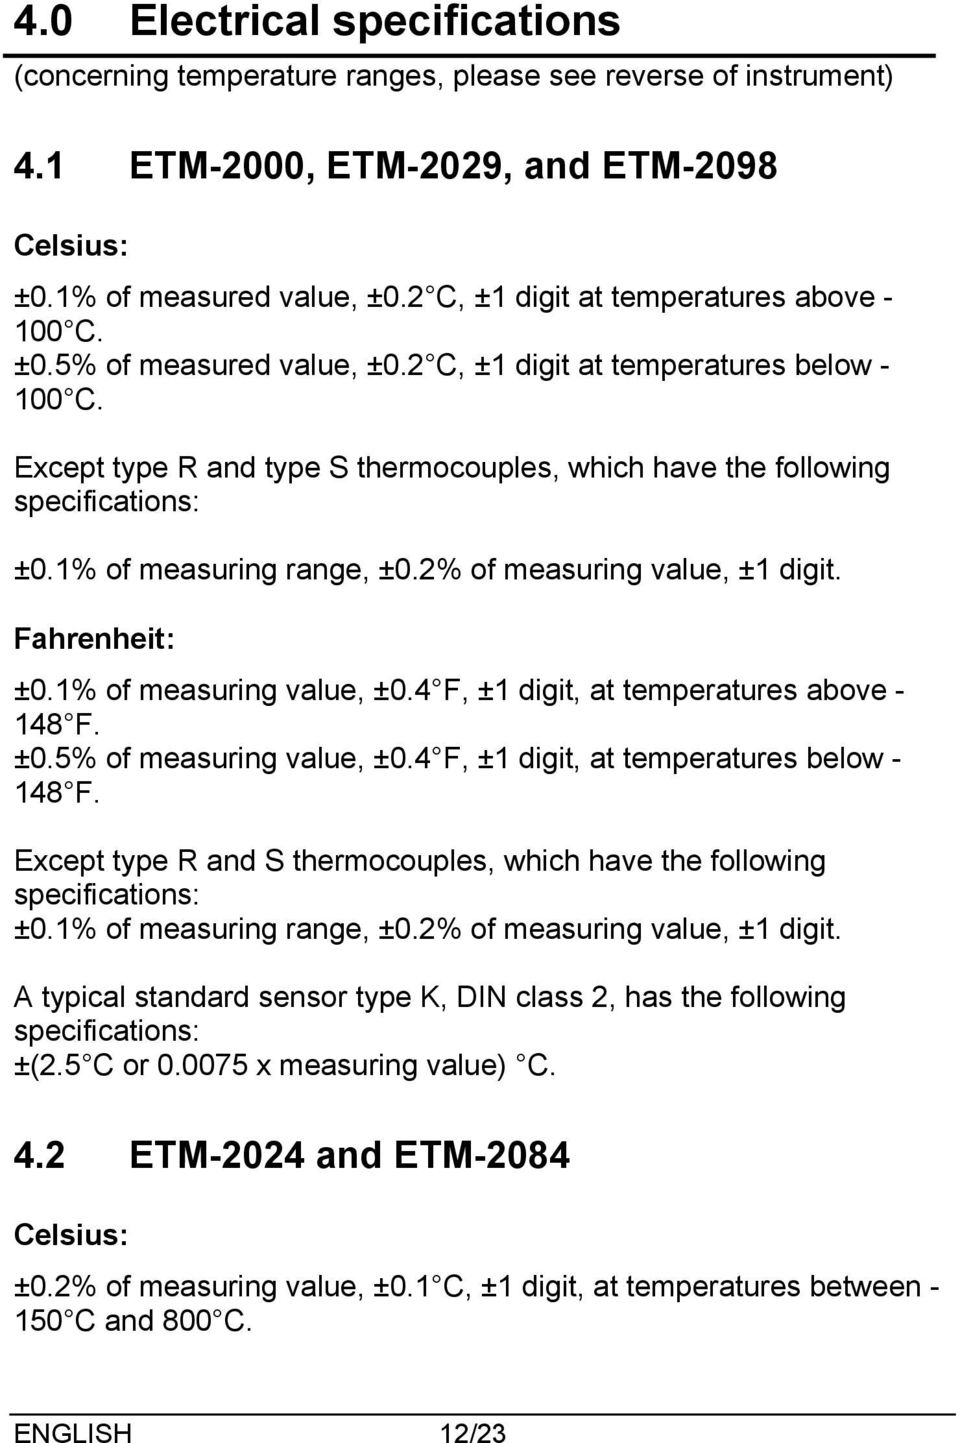 Except type R and type S thermocouples, which have the following specifications: ±0.1% of measuring range, ±0.2% of measuring value, ±1 digit. Fahrenheit: ±0.1% of measuring value, ±0.